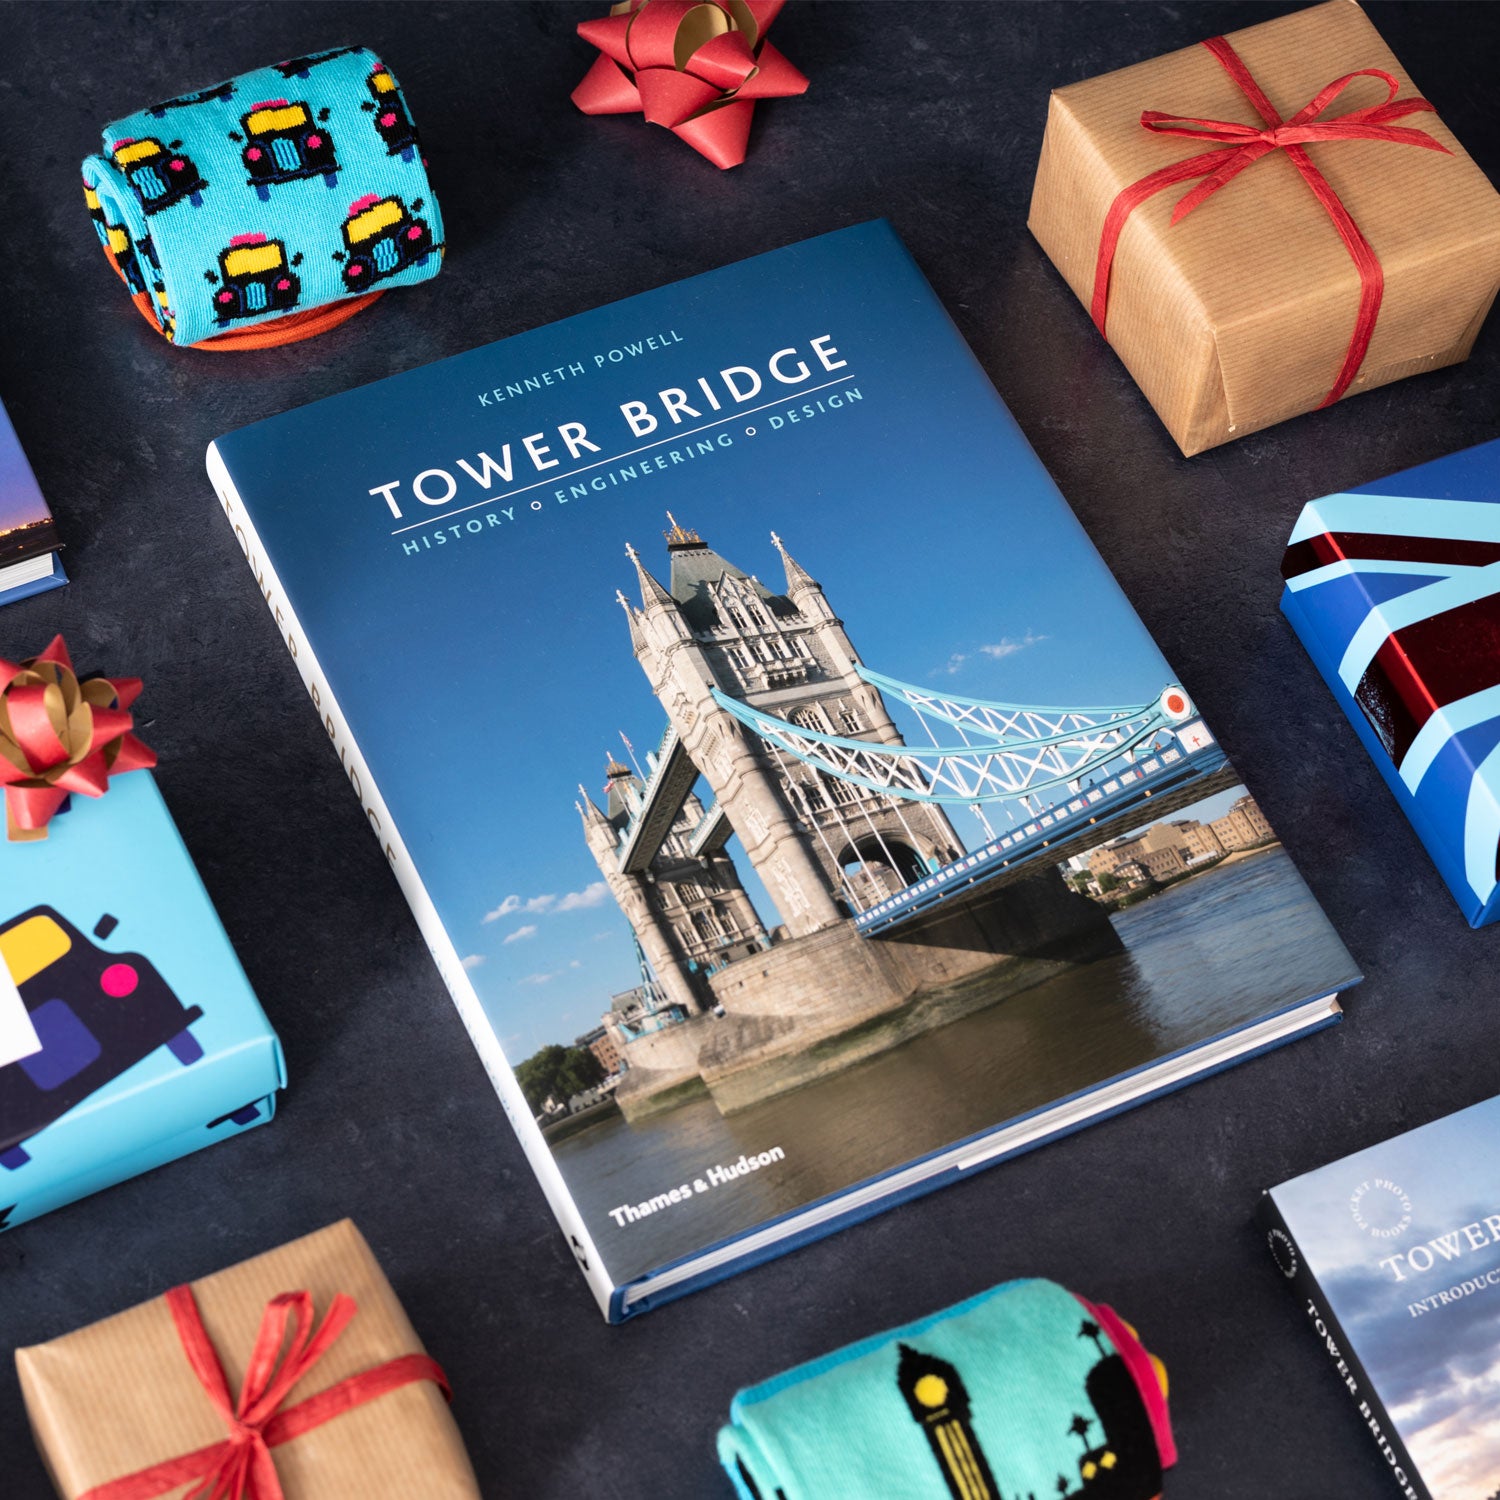 Gifts from Tower Bridge